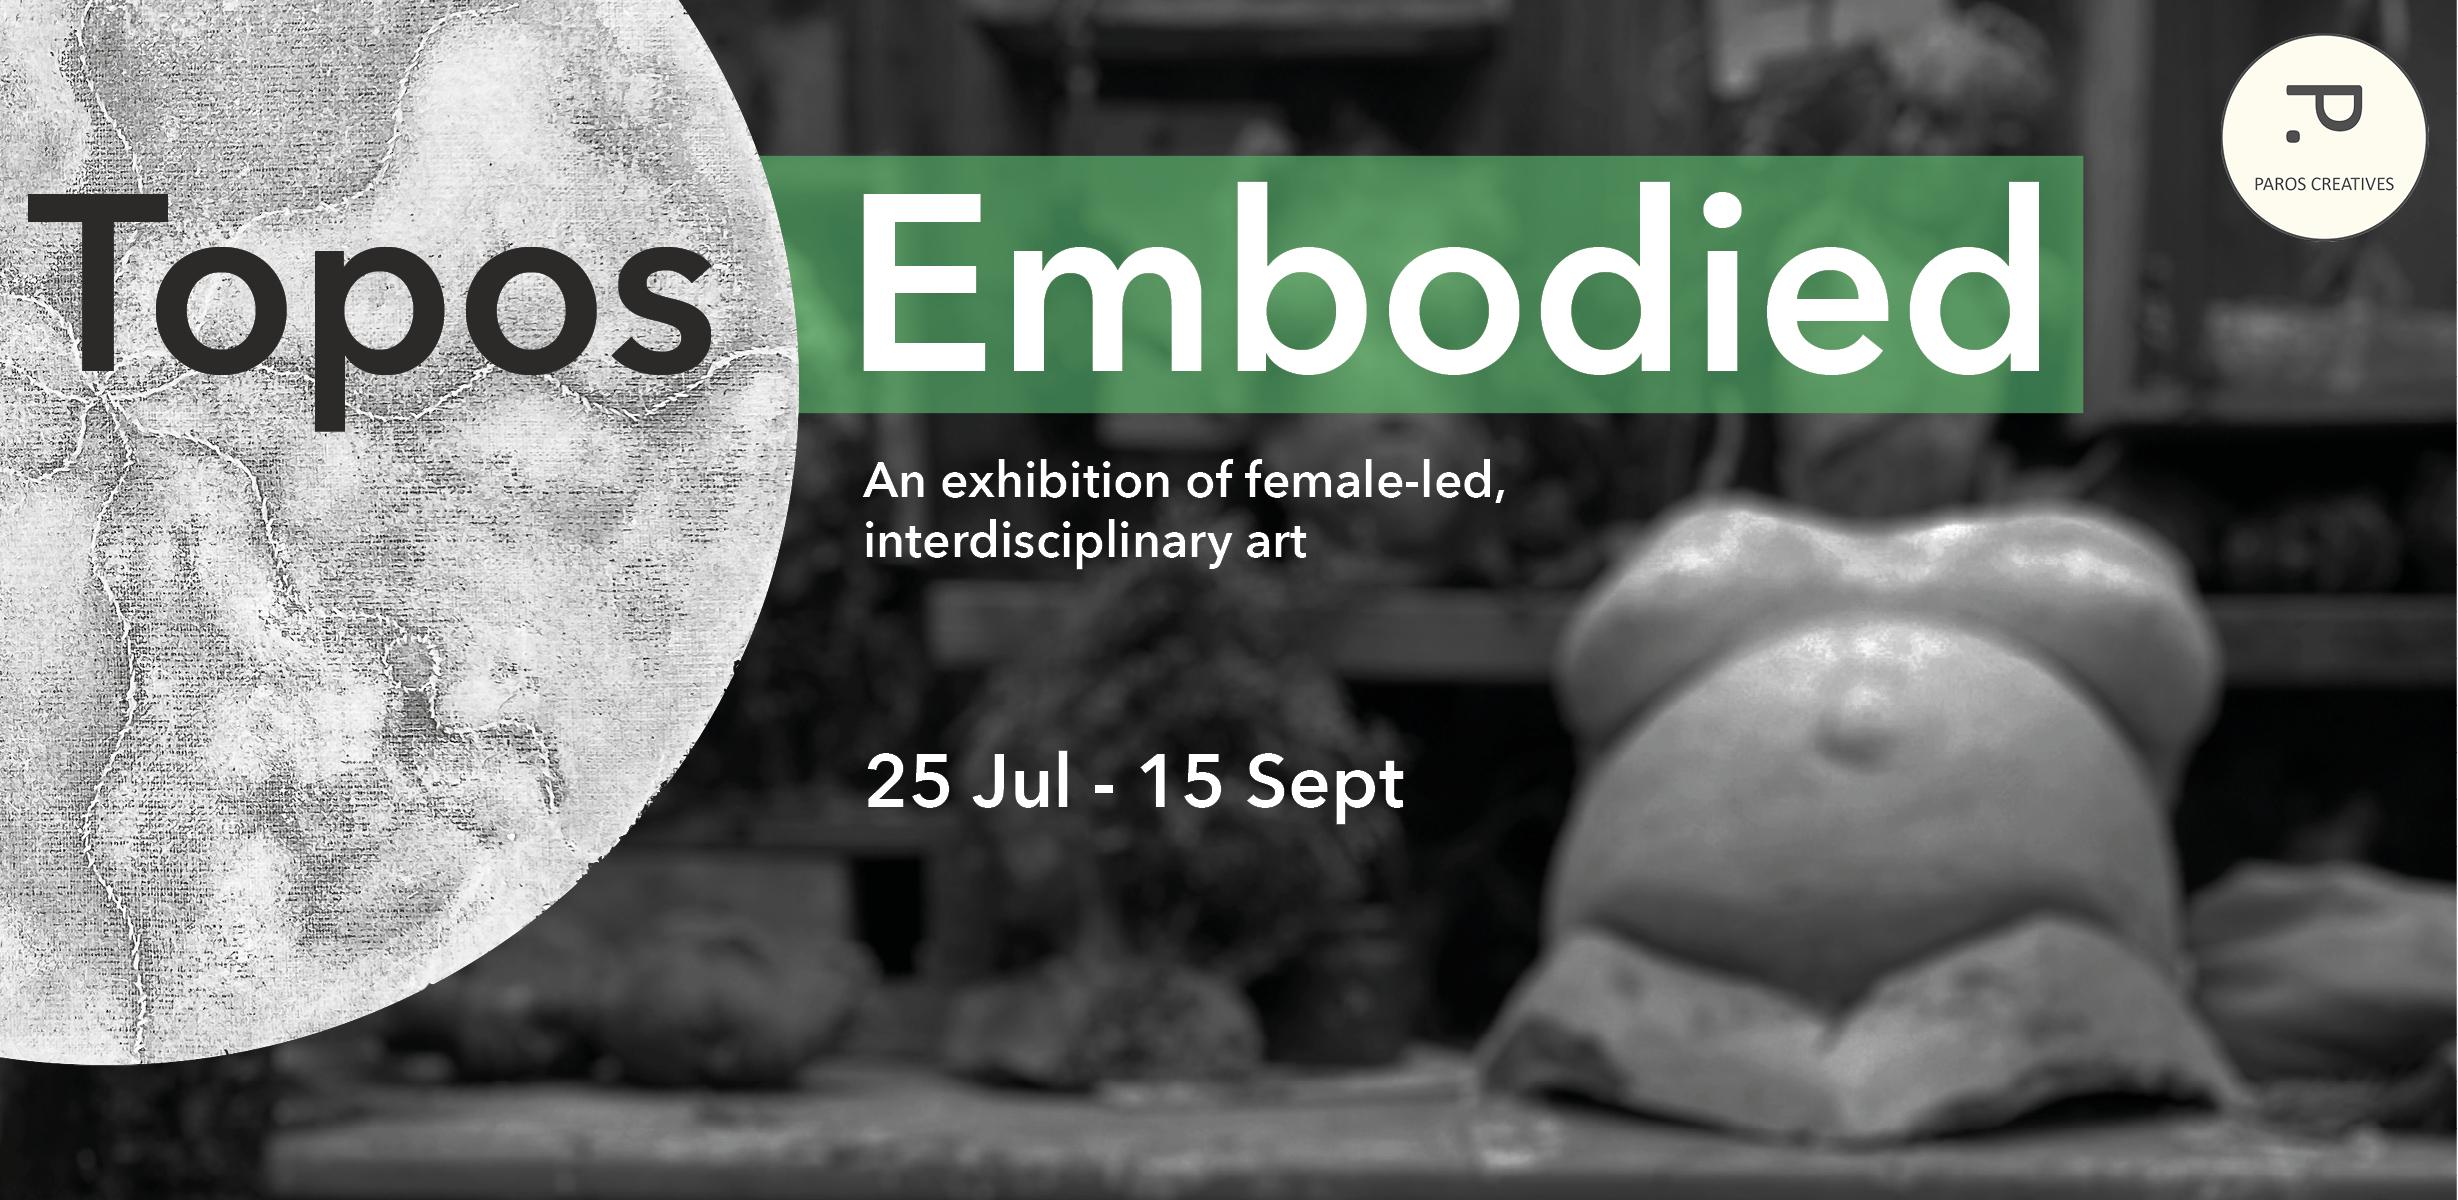 Topos Embodied. An exhibition of female-led, interdisciplinary art. 25 Jul - 15 Sept